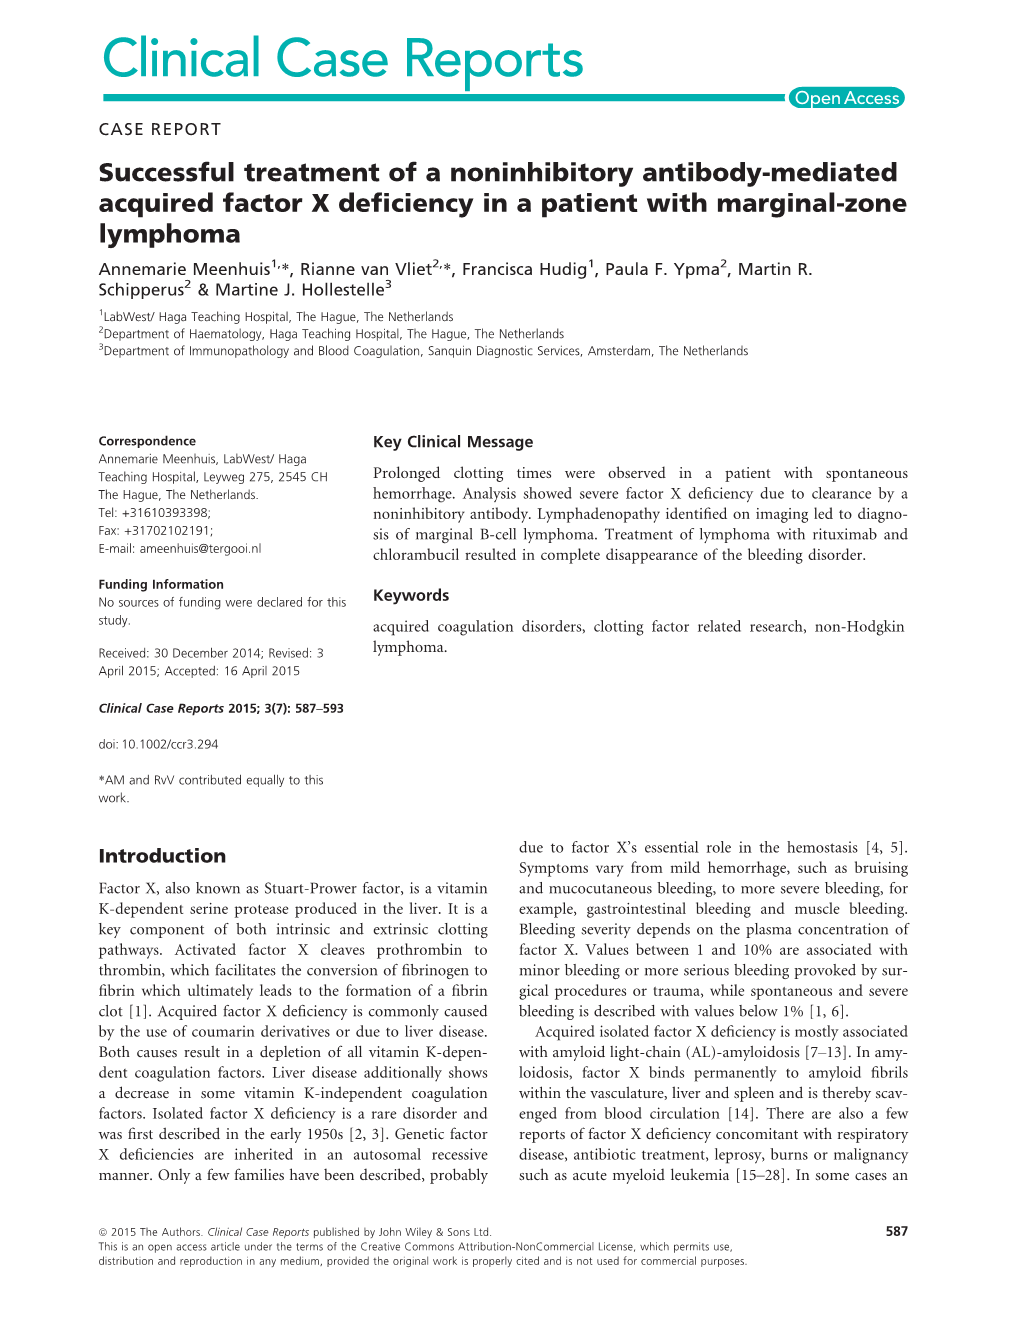 Mediated Acquired Factor X Deficiency in a Patient with Marginal